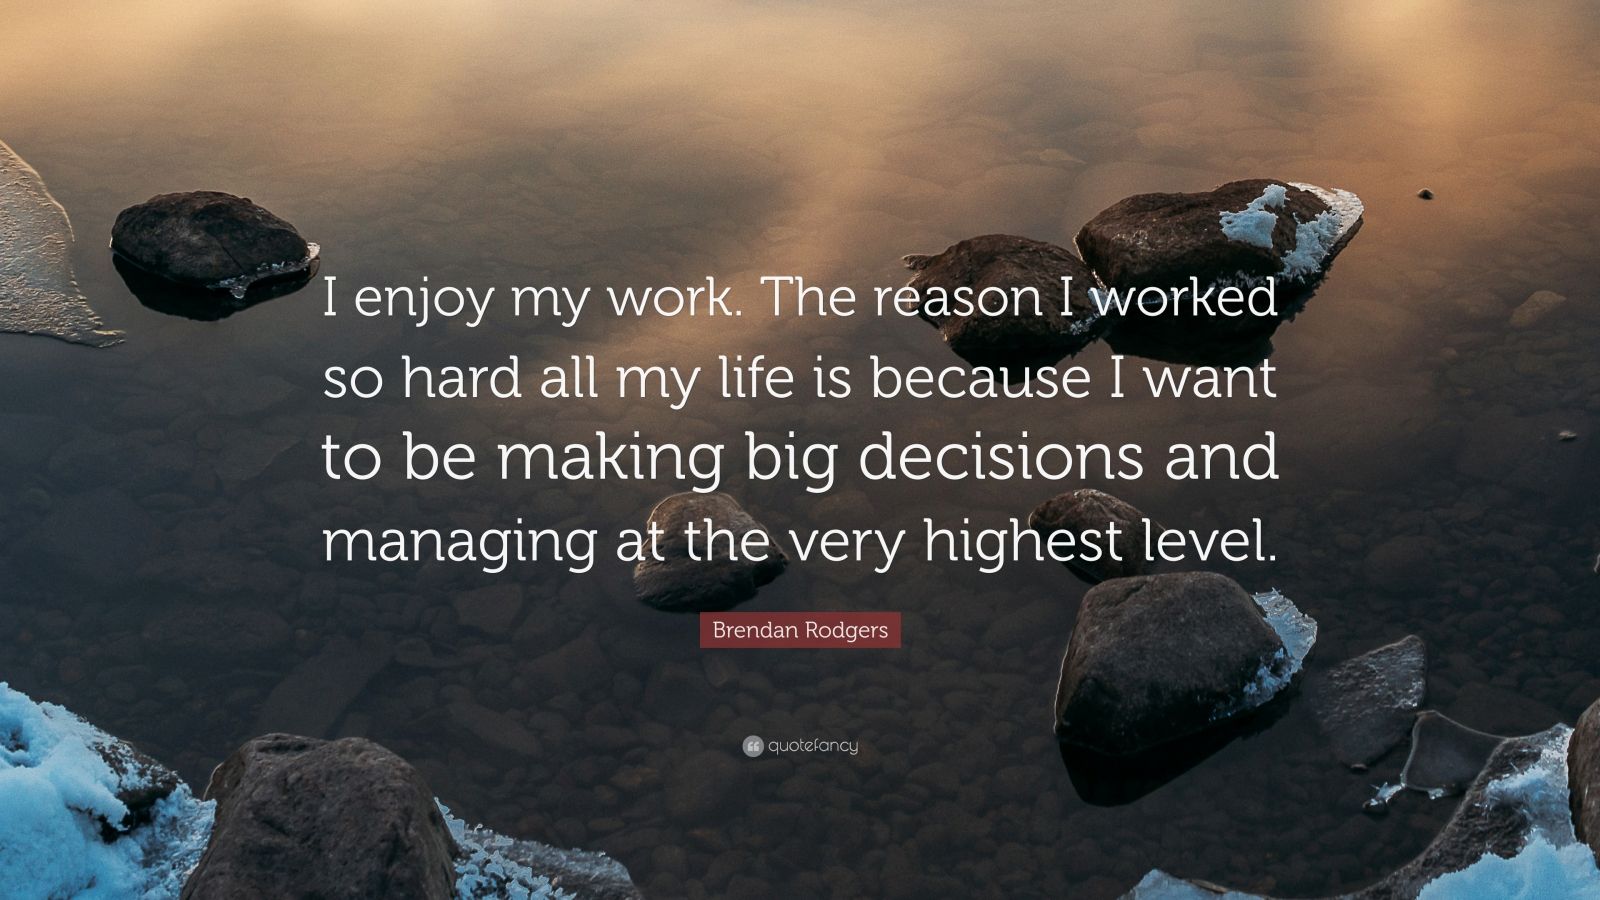 Brendan Rodgers Quote: “I enjoy my work. The reason I worked so hard ...